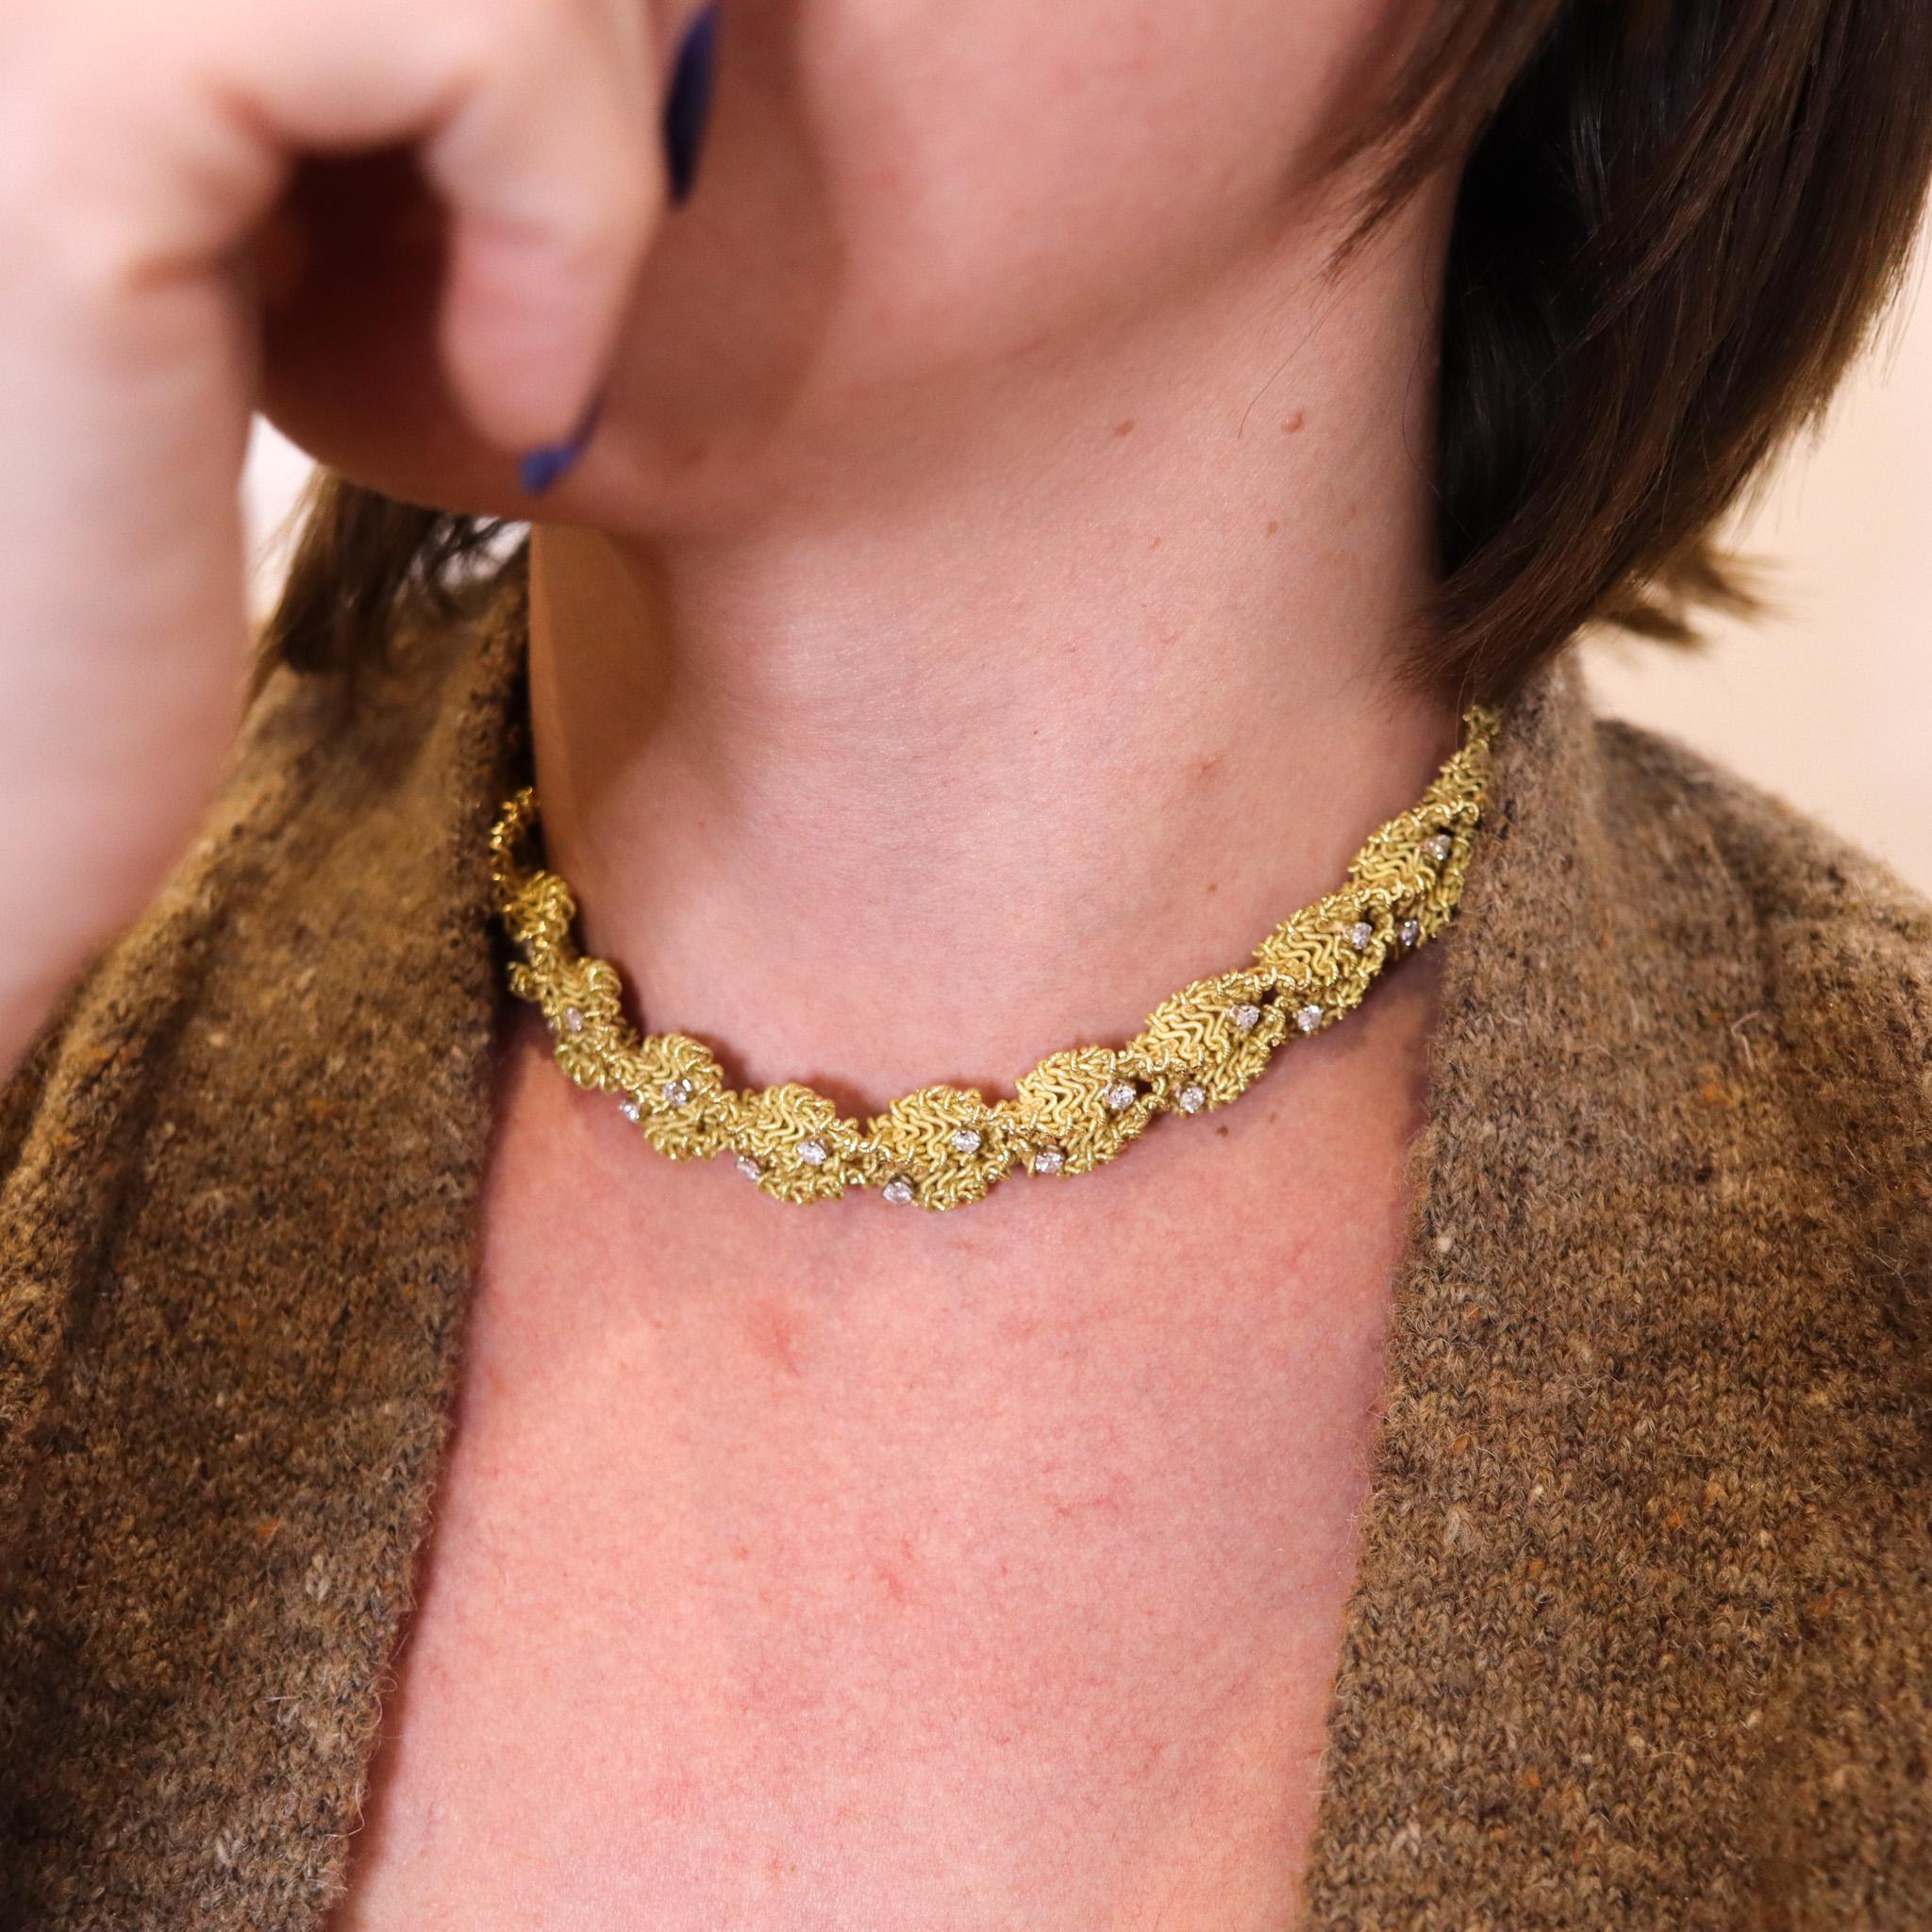 Chantecler 1960 Textured Twisted Necklace In 18Kt Gold With 5.15 Ctw In Diamonds For Sale 1